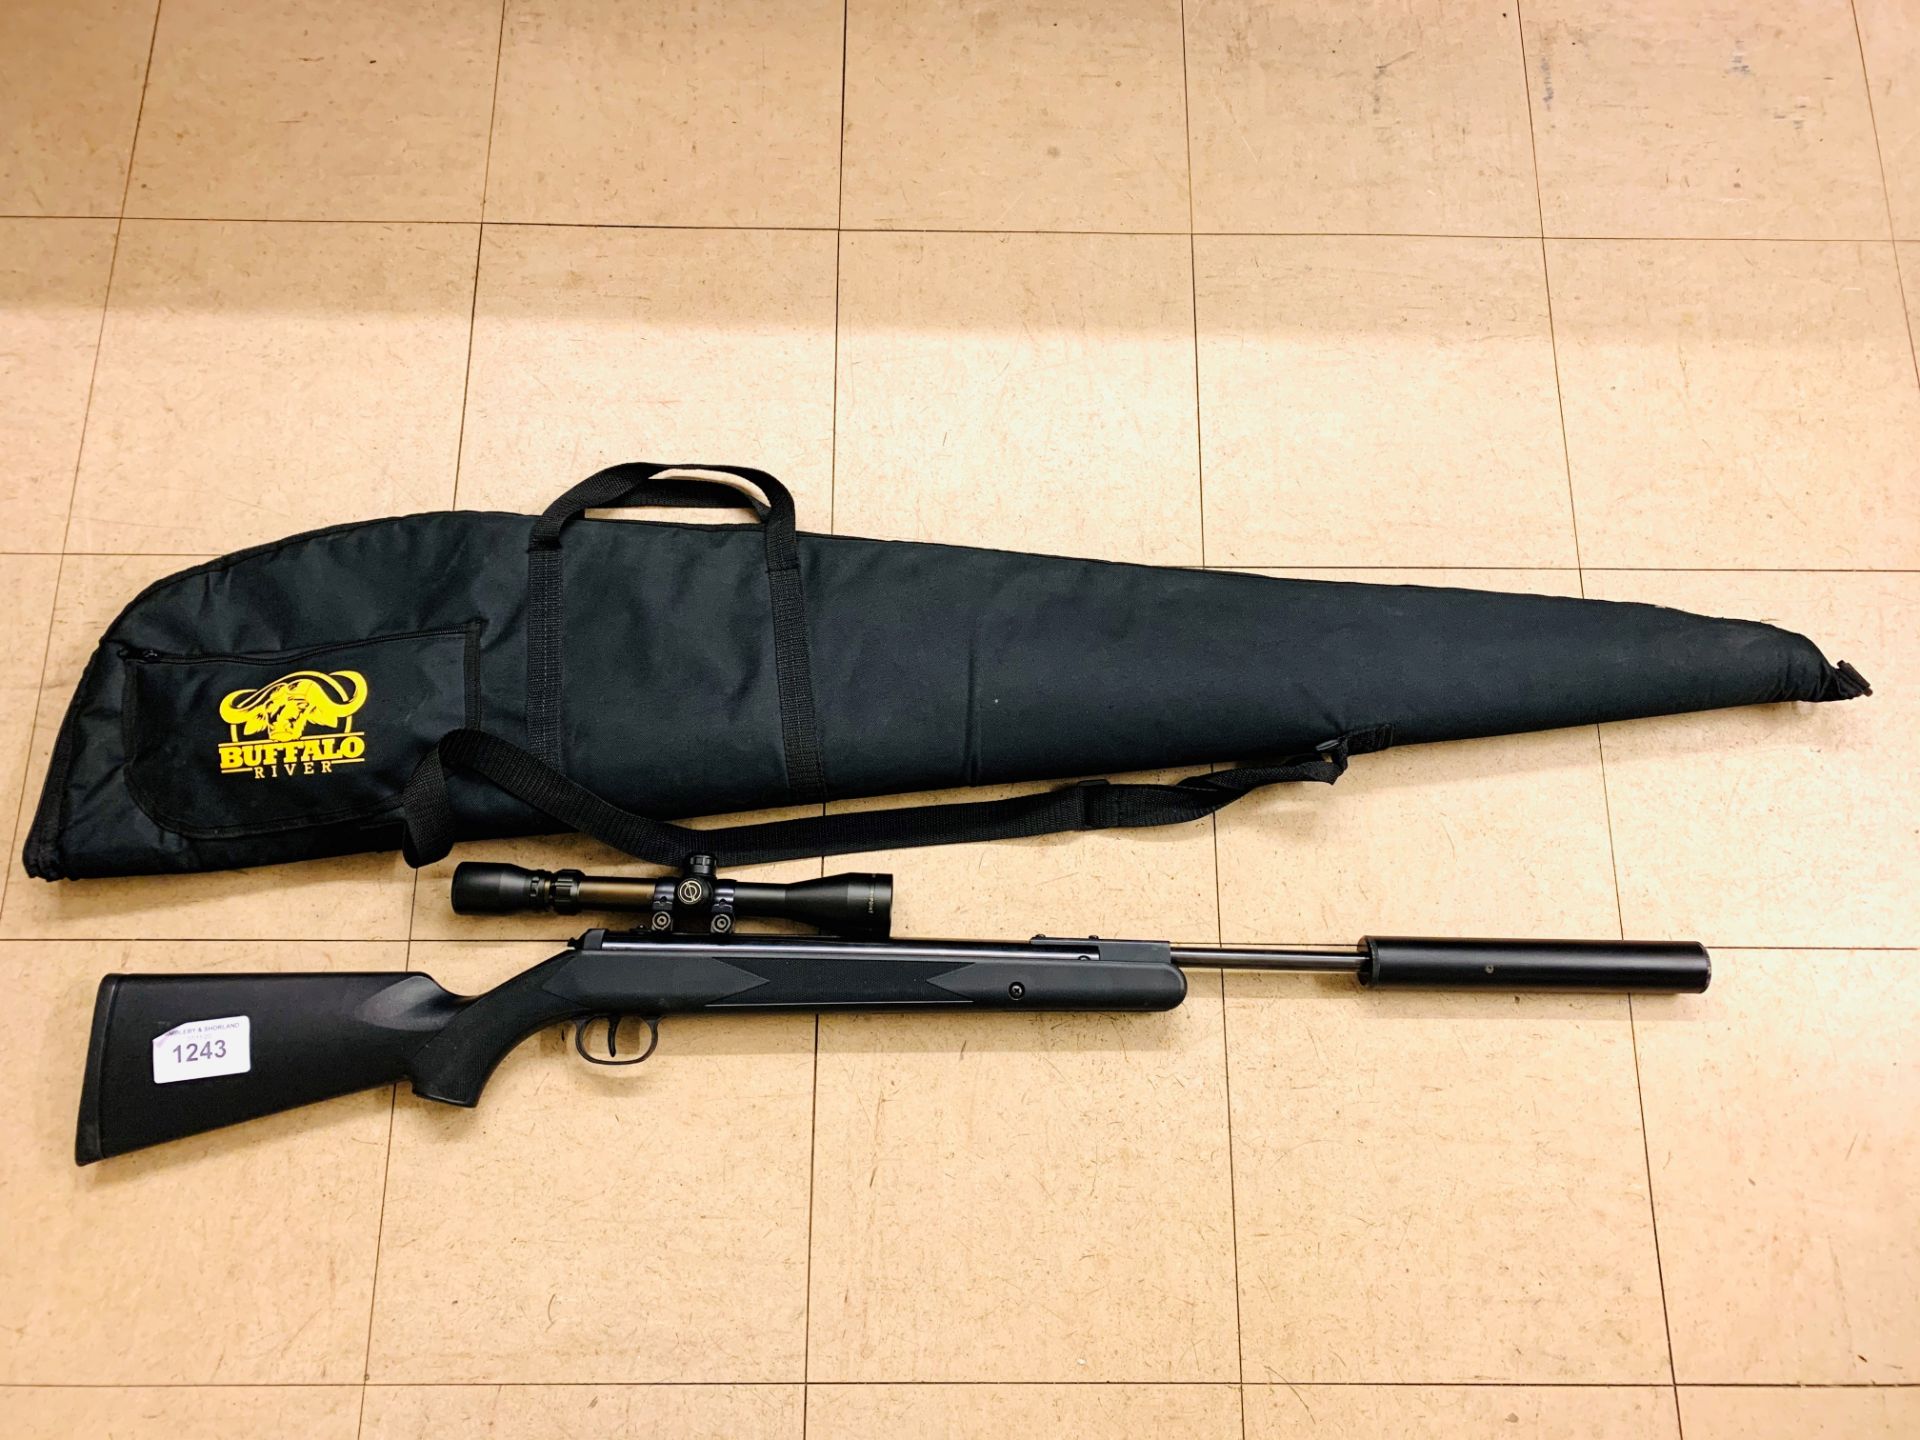 Hammerli Black Force 800 .22 Air Rifle, with scope and suppressor